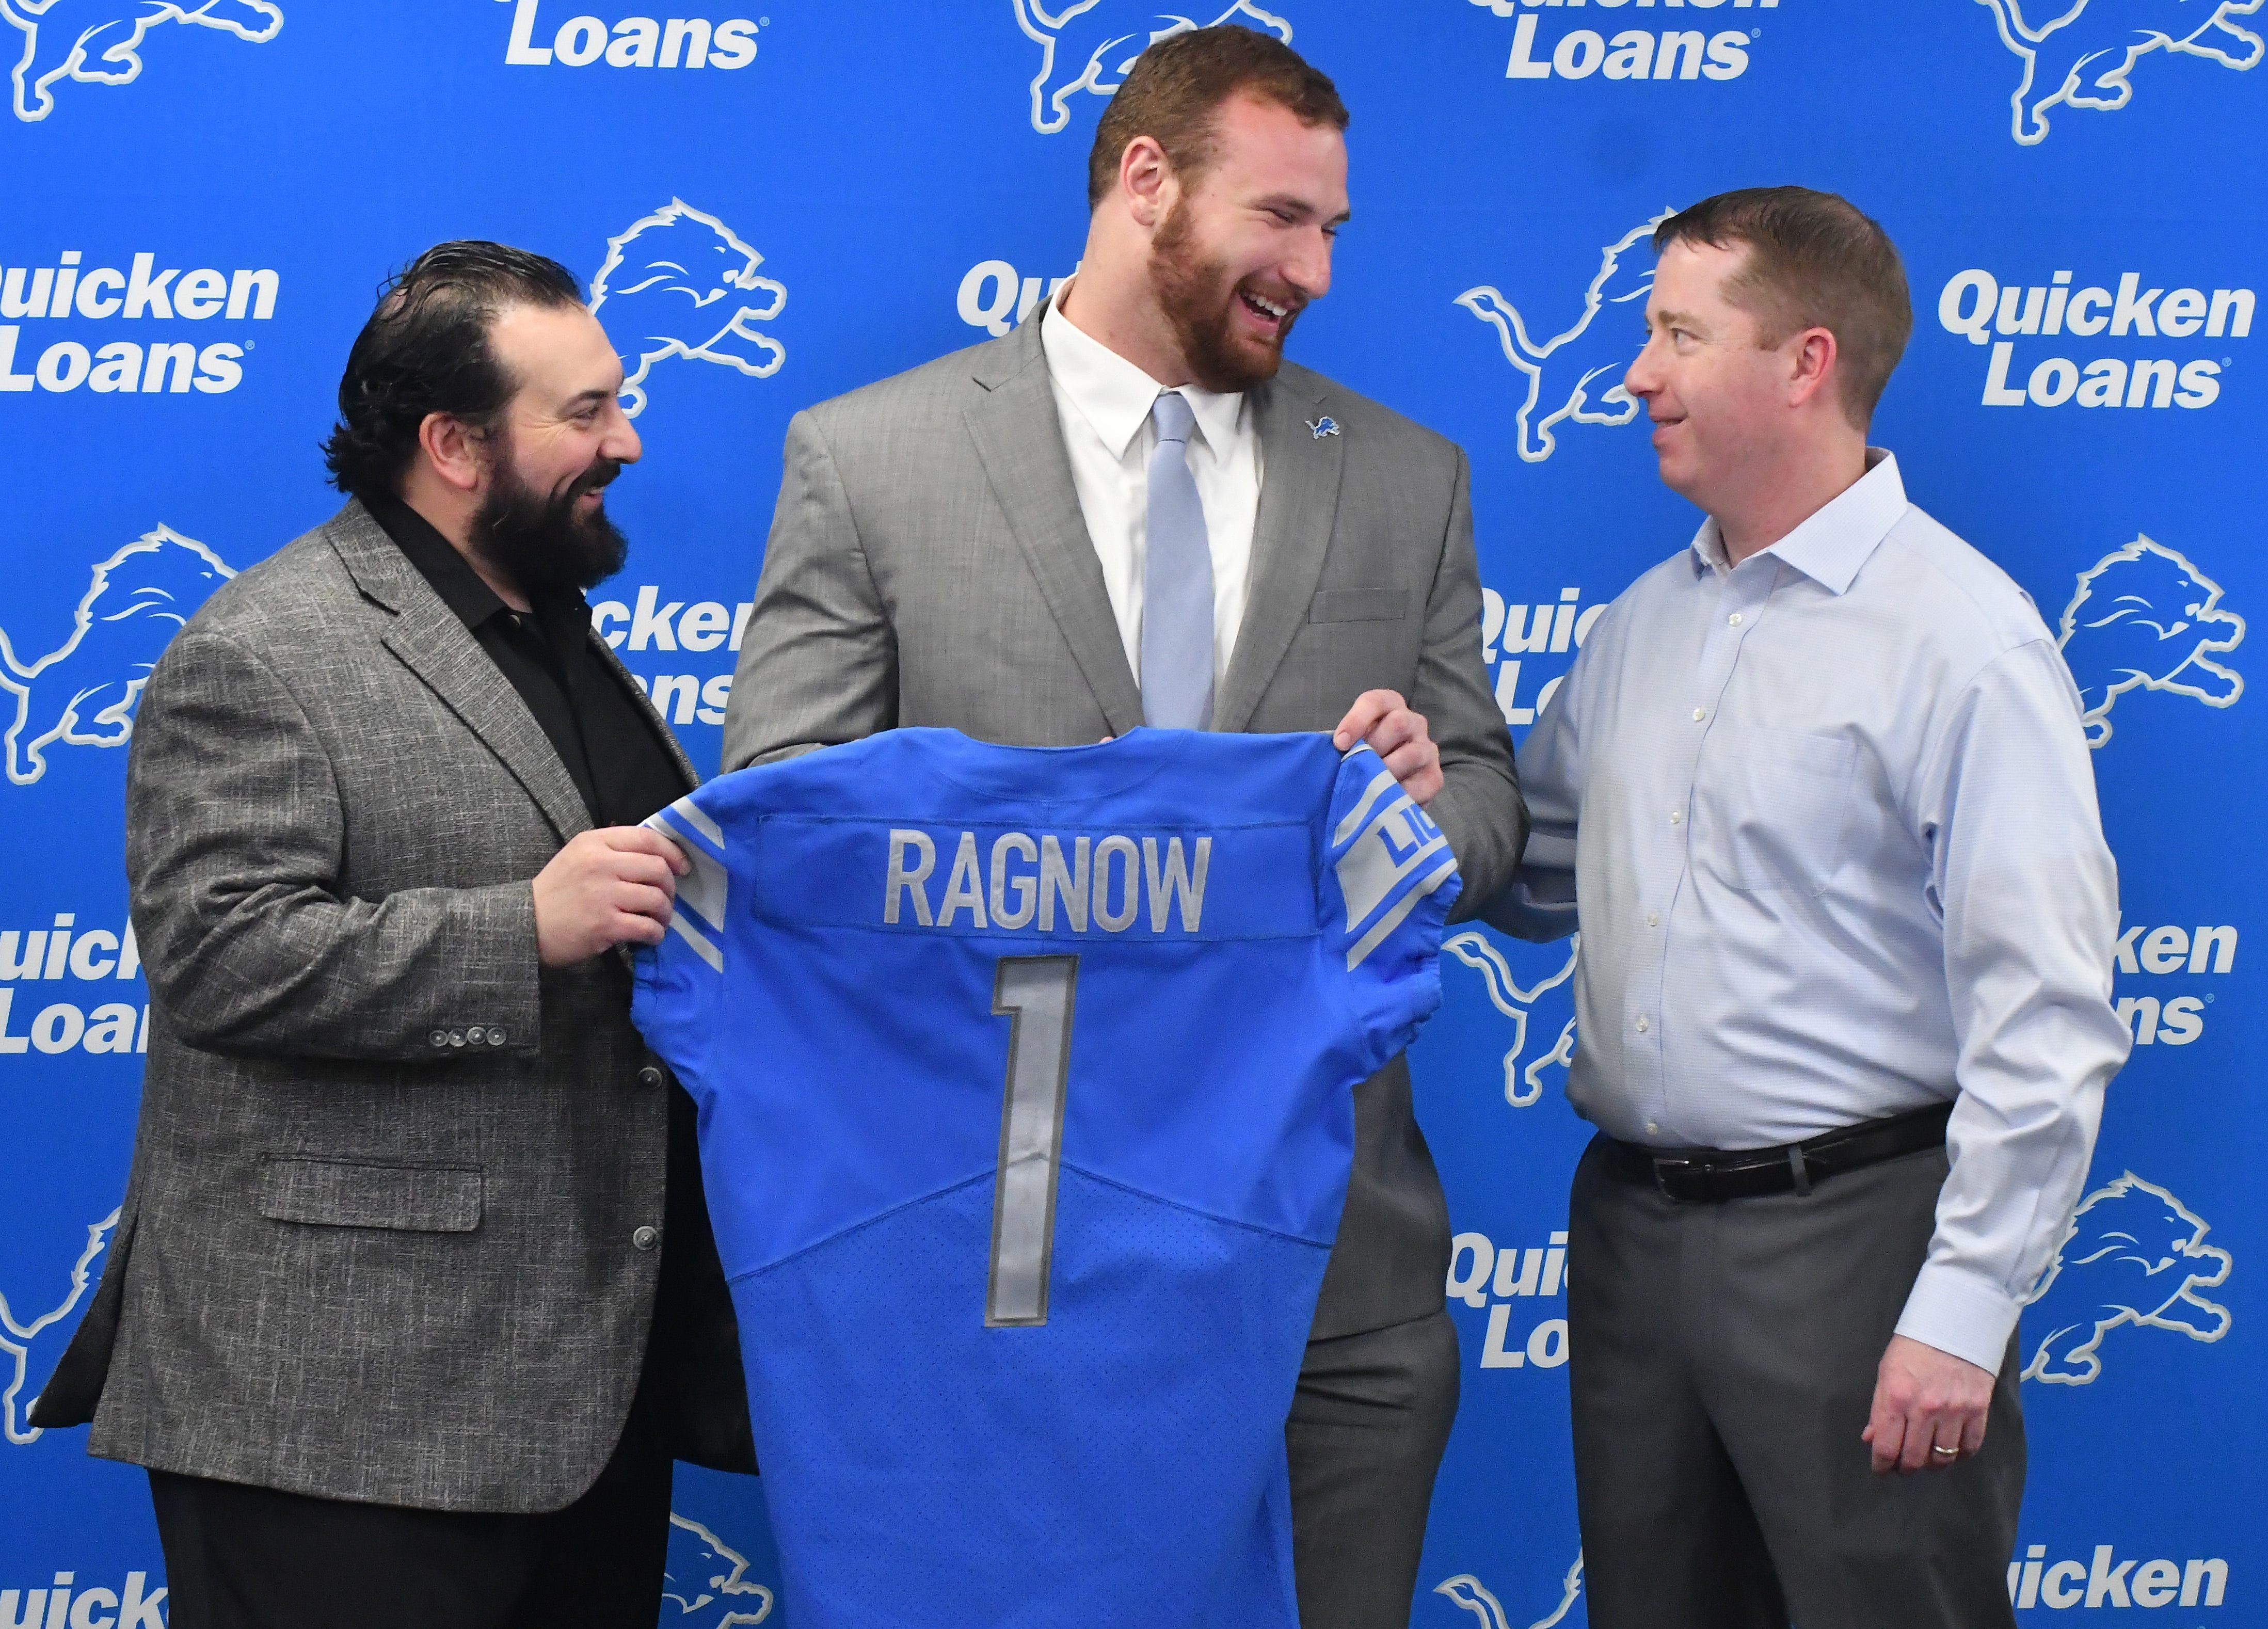 Detroit Lions 2018 first round draft pick Frank Ragnow with head coach Matt Patricia and GM Bob Quinn at training facility in Allen Park, Michigan on April 27, 2018.  (Image by Daniel Mears / The Detroit News).